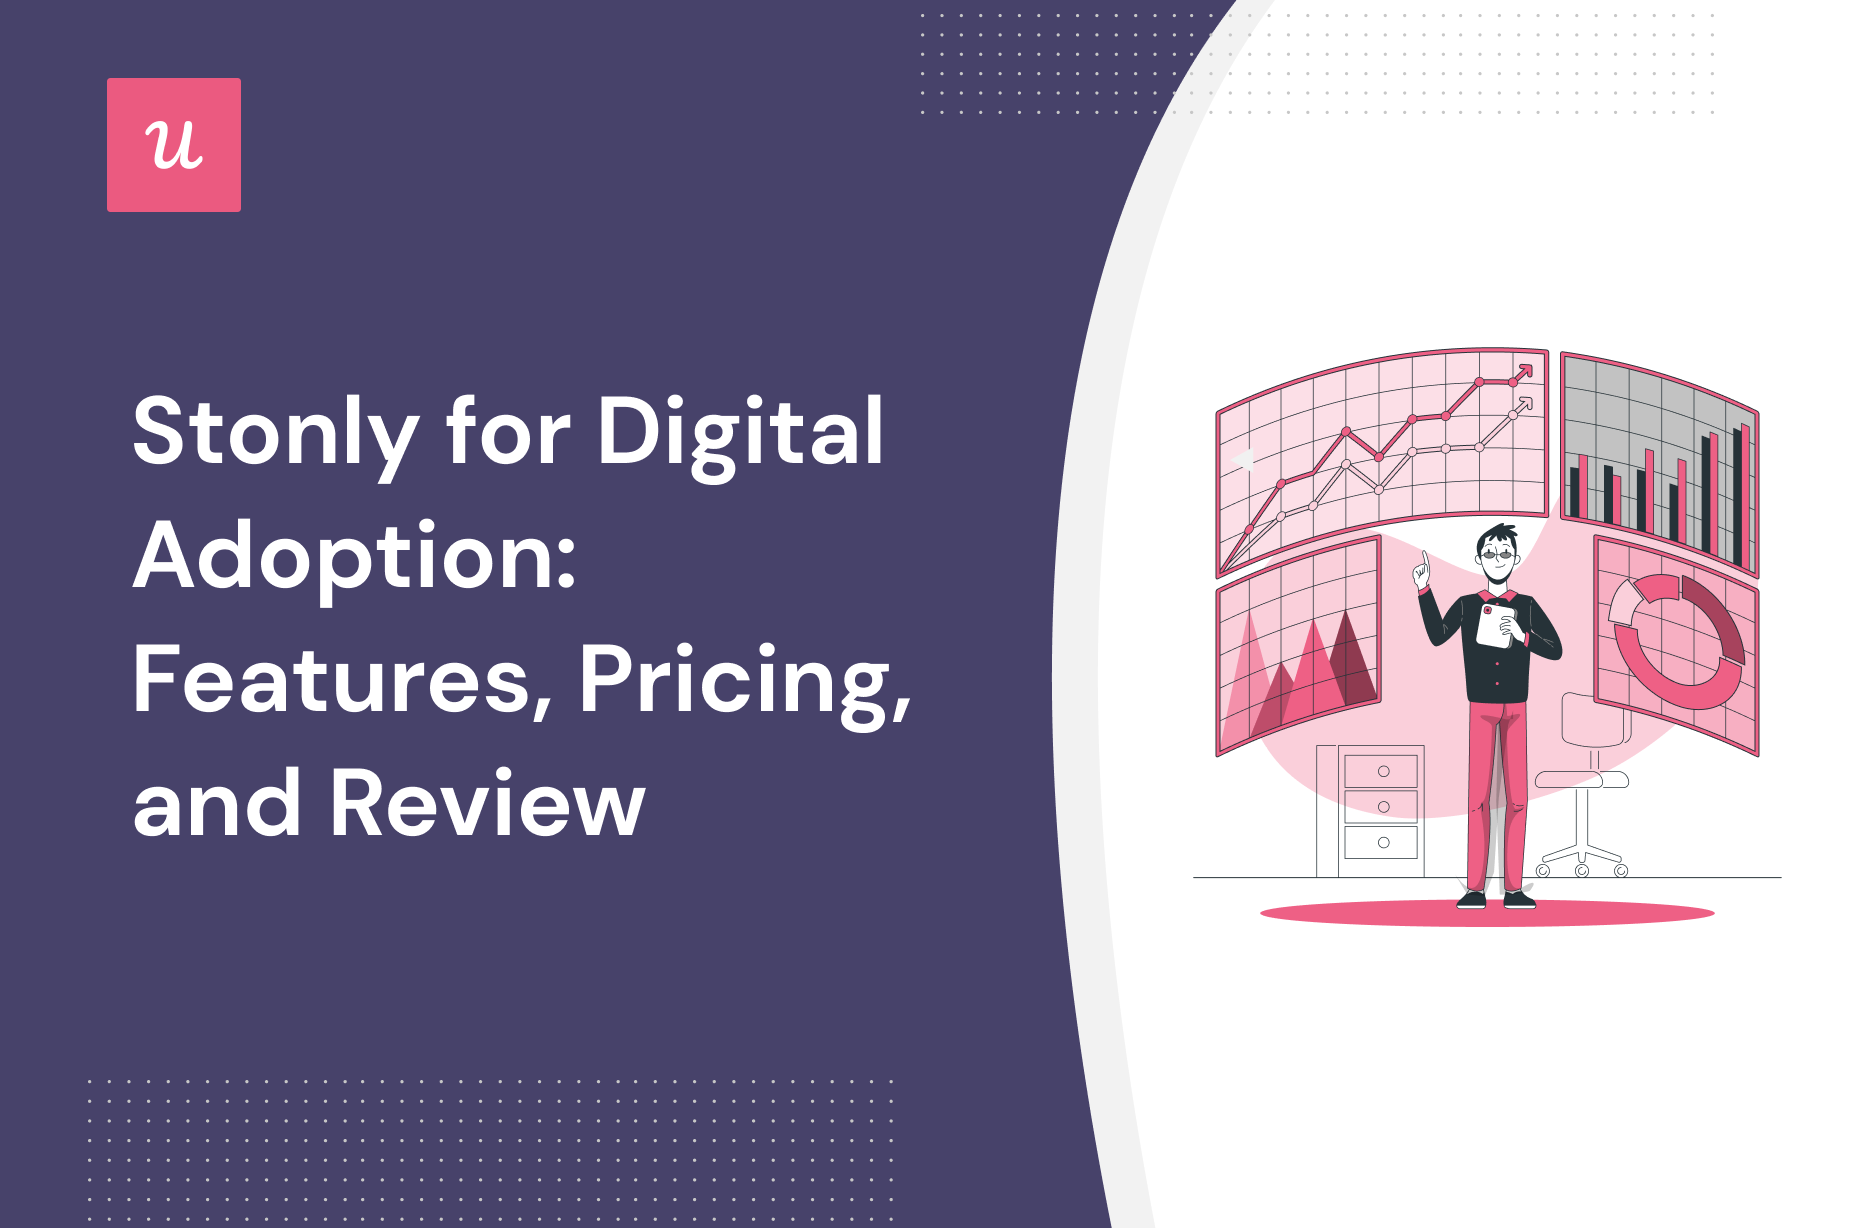 Stonly for Digital Adoption: Features, Pricing, and Review